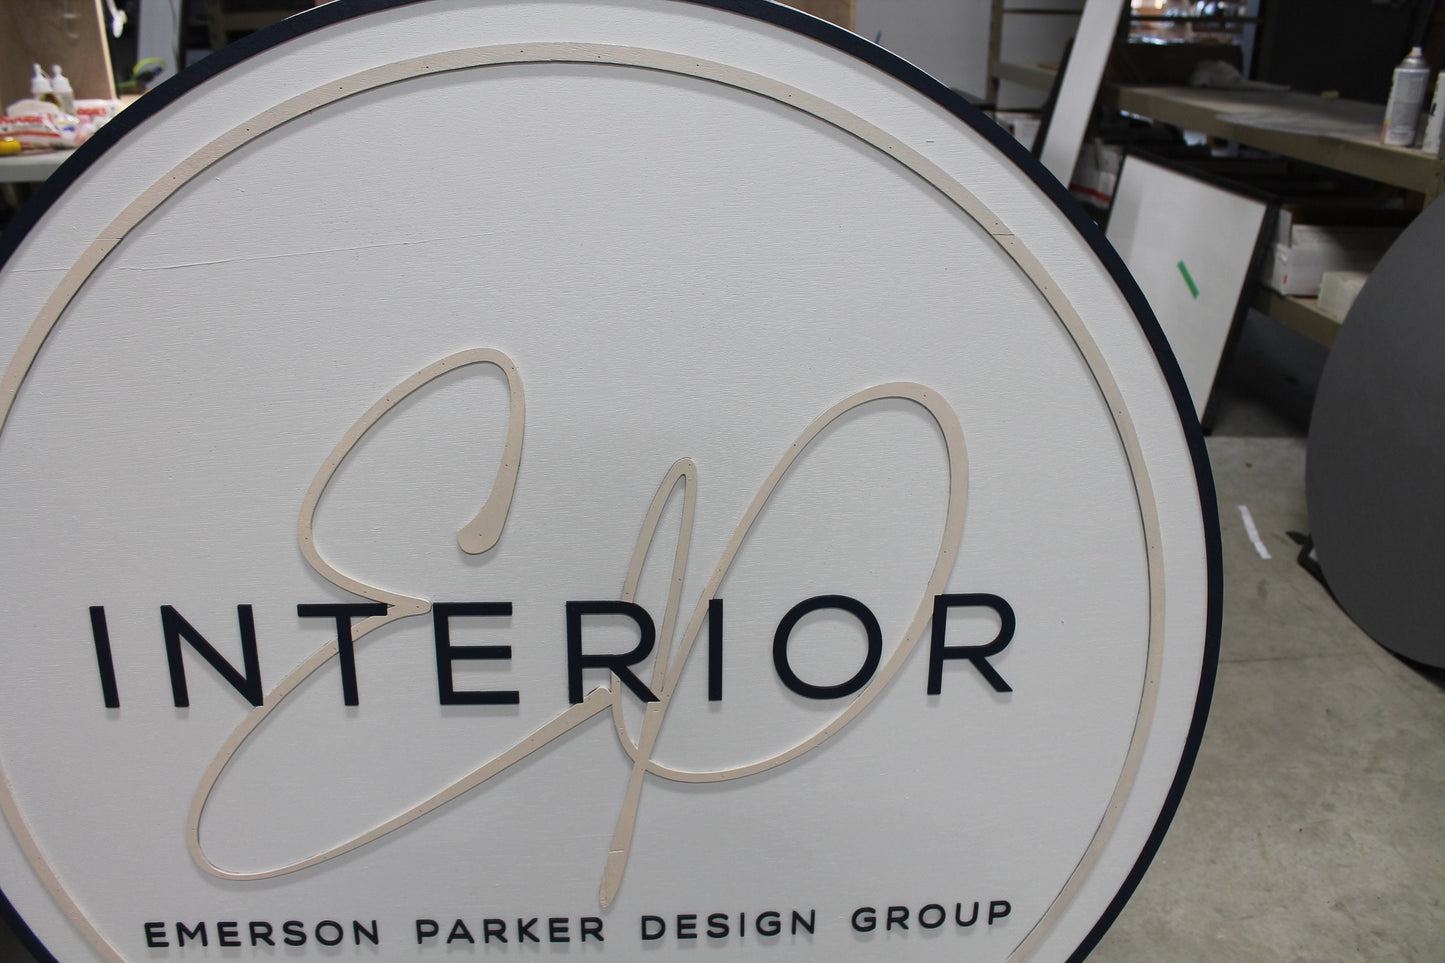 Custom Sign Round Business Interior Designer Group Commerical Signage Made to Order Logo Circle Wooden Handmade Raised Text Home Minimalist